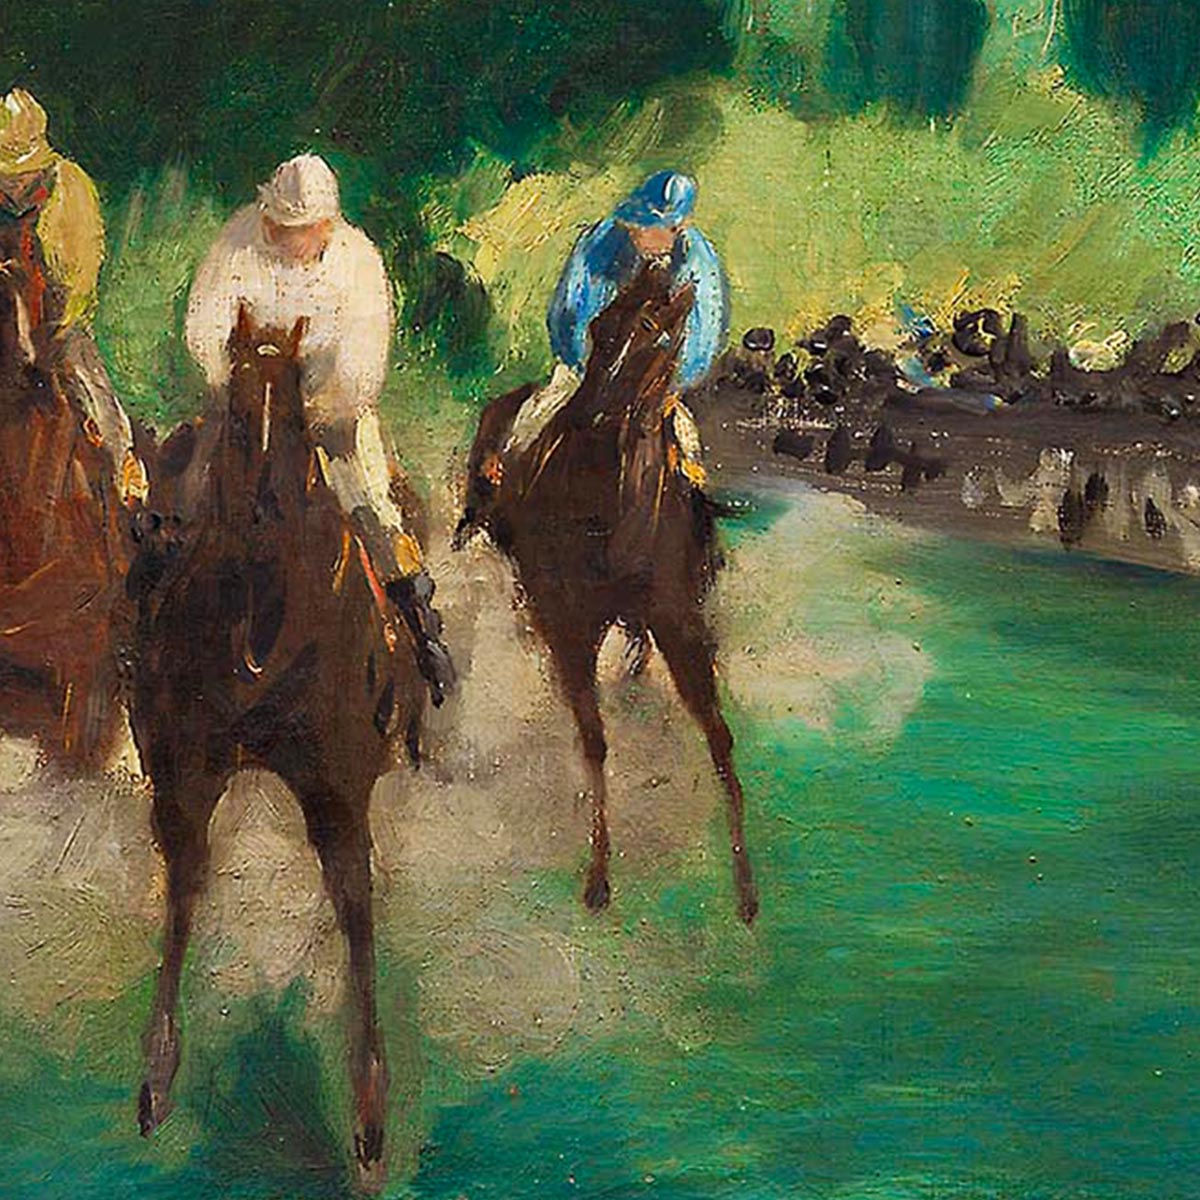 The Races at Longchamp by Manet Exhibition Poster